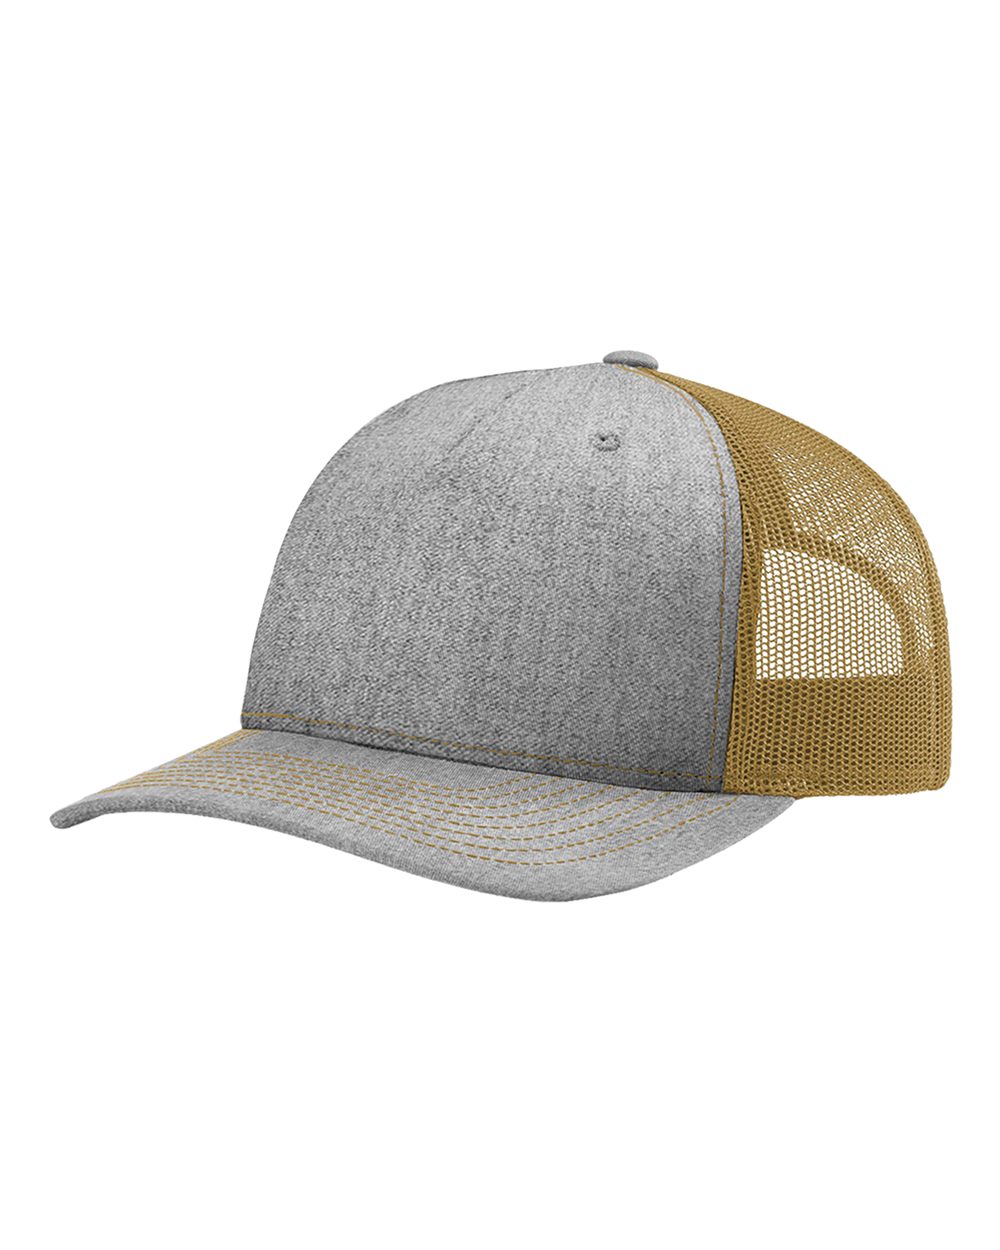 click to view Heather Grey/ Amber Gold